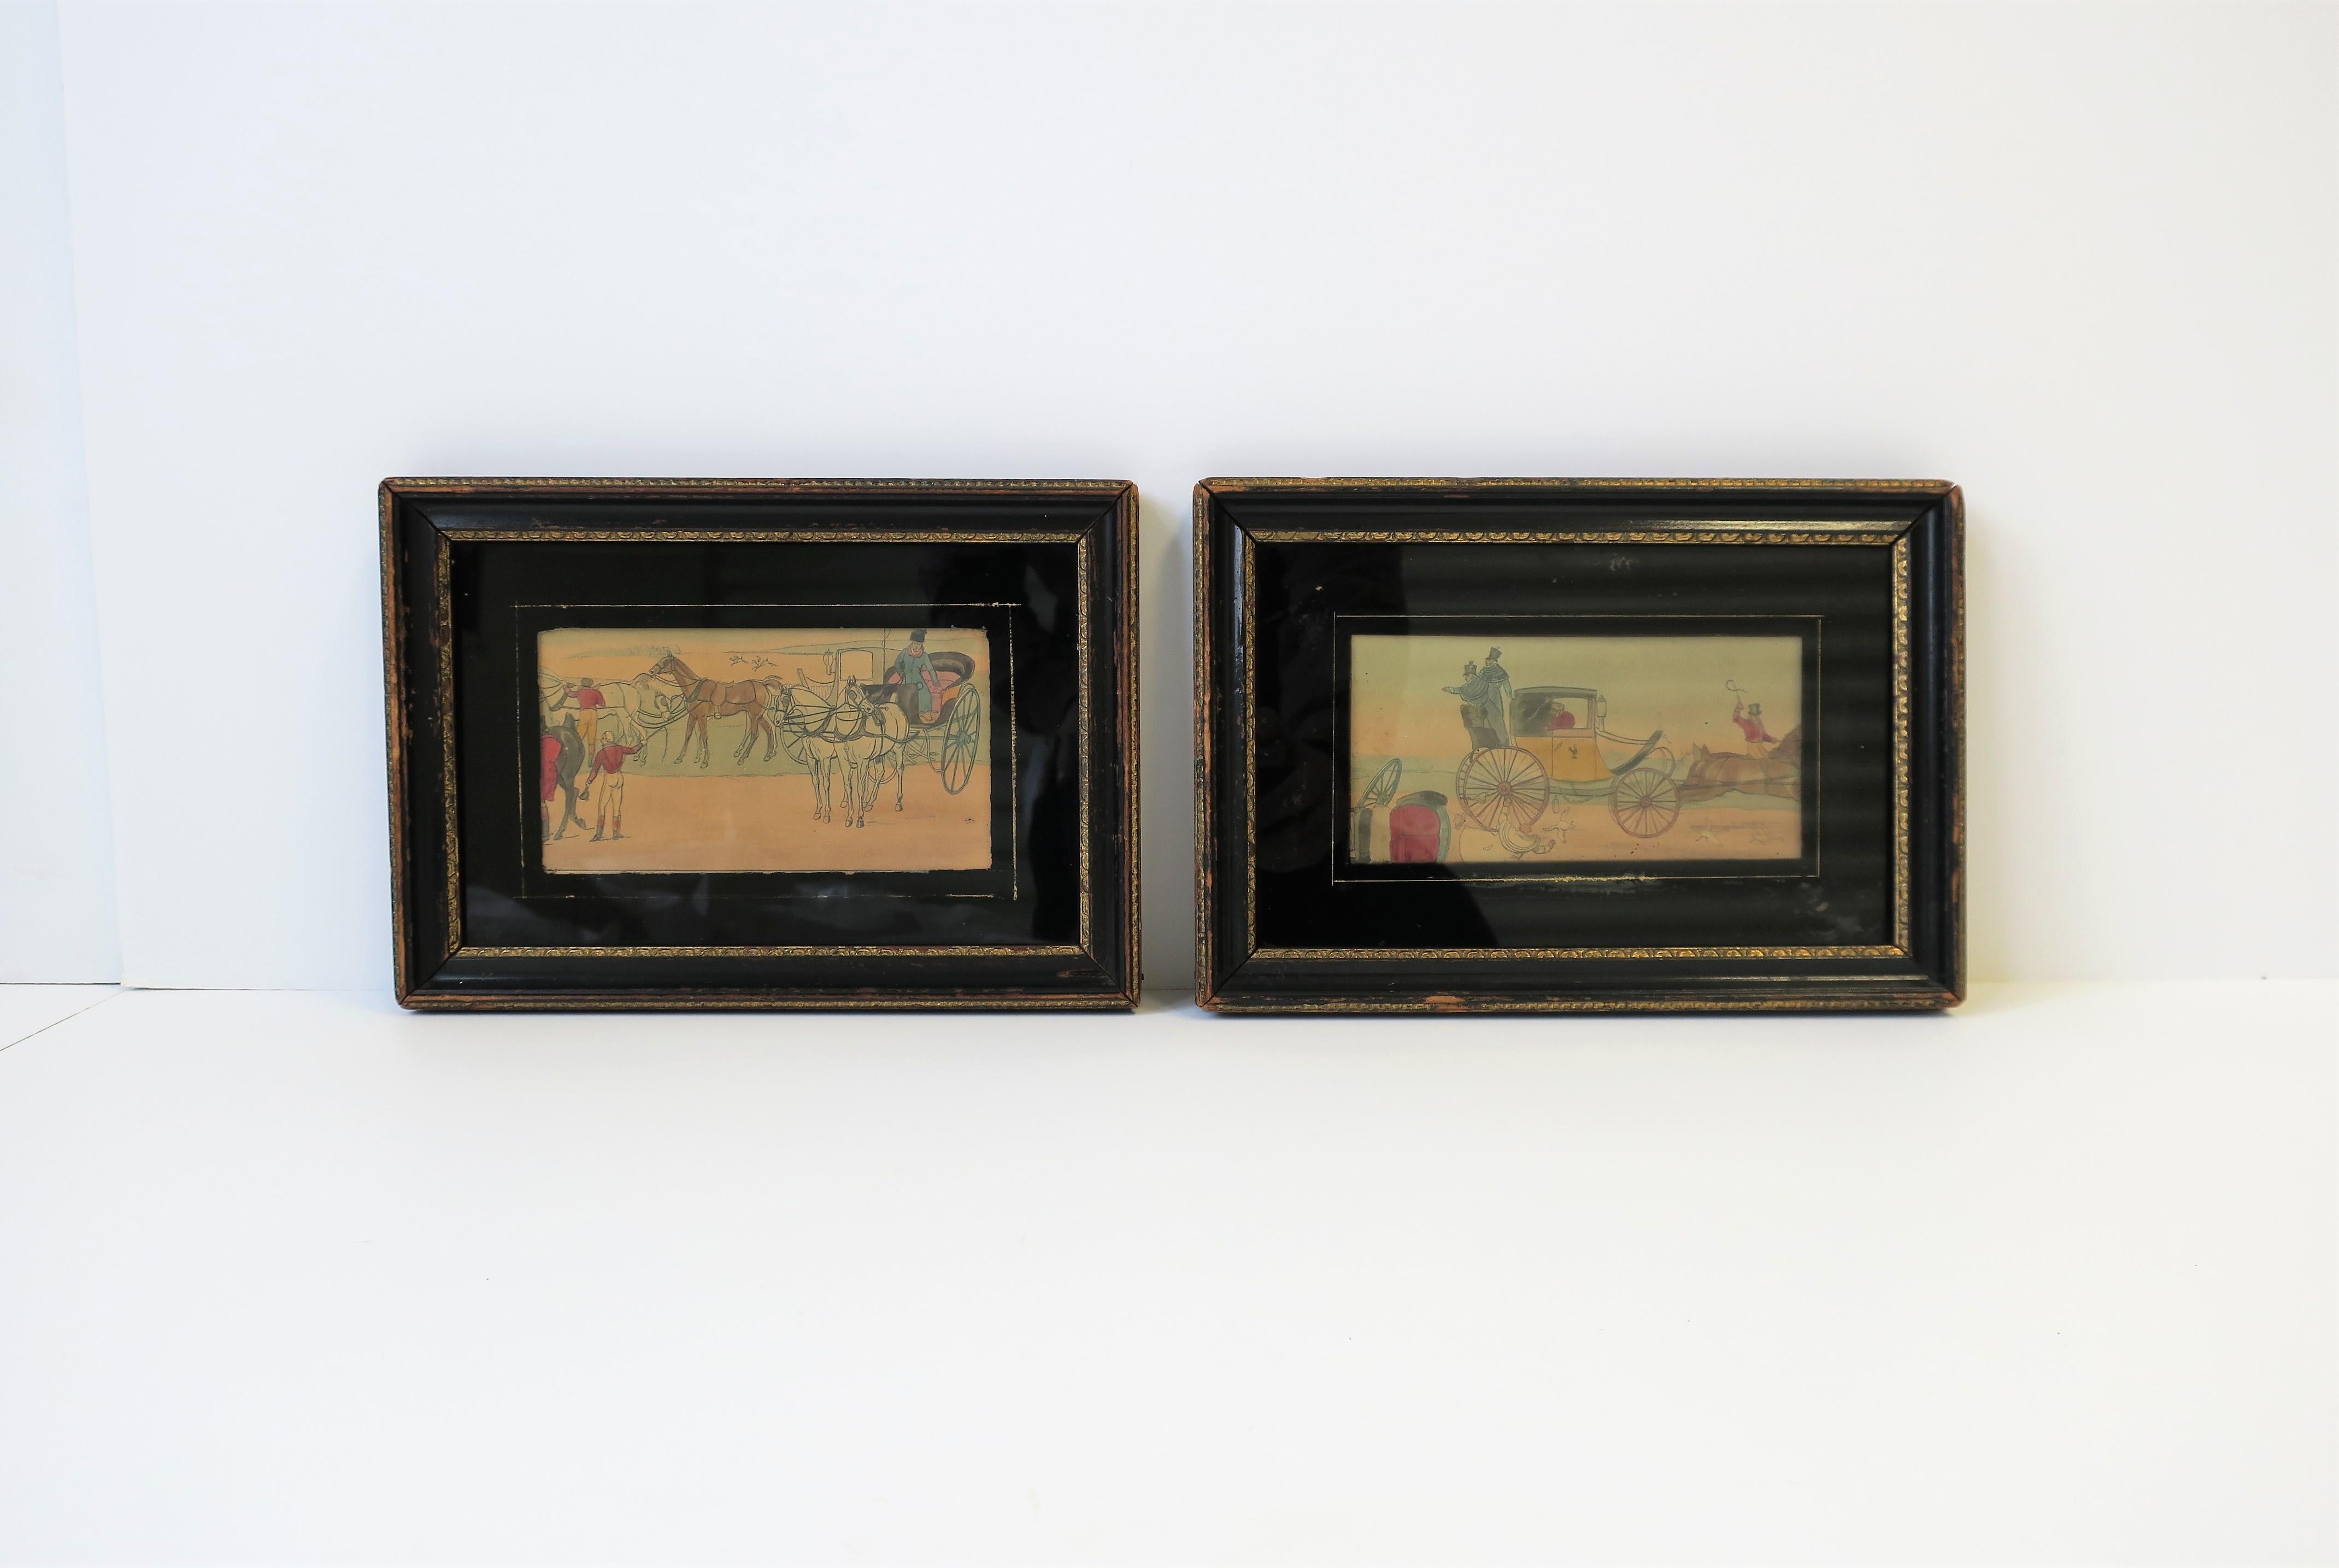 A beautiful set of two antique black and gold handmade frames with prints or tears from an old story book that have been hand-colored in (watercolor), circa early 20th century. Pieces have a glass protector with a black and gold reverse overlay